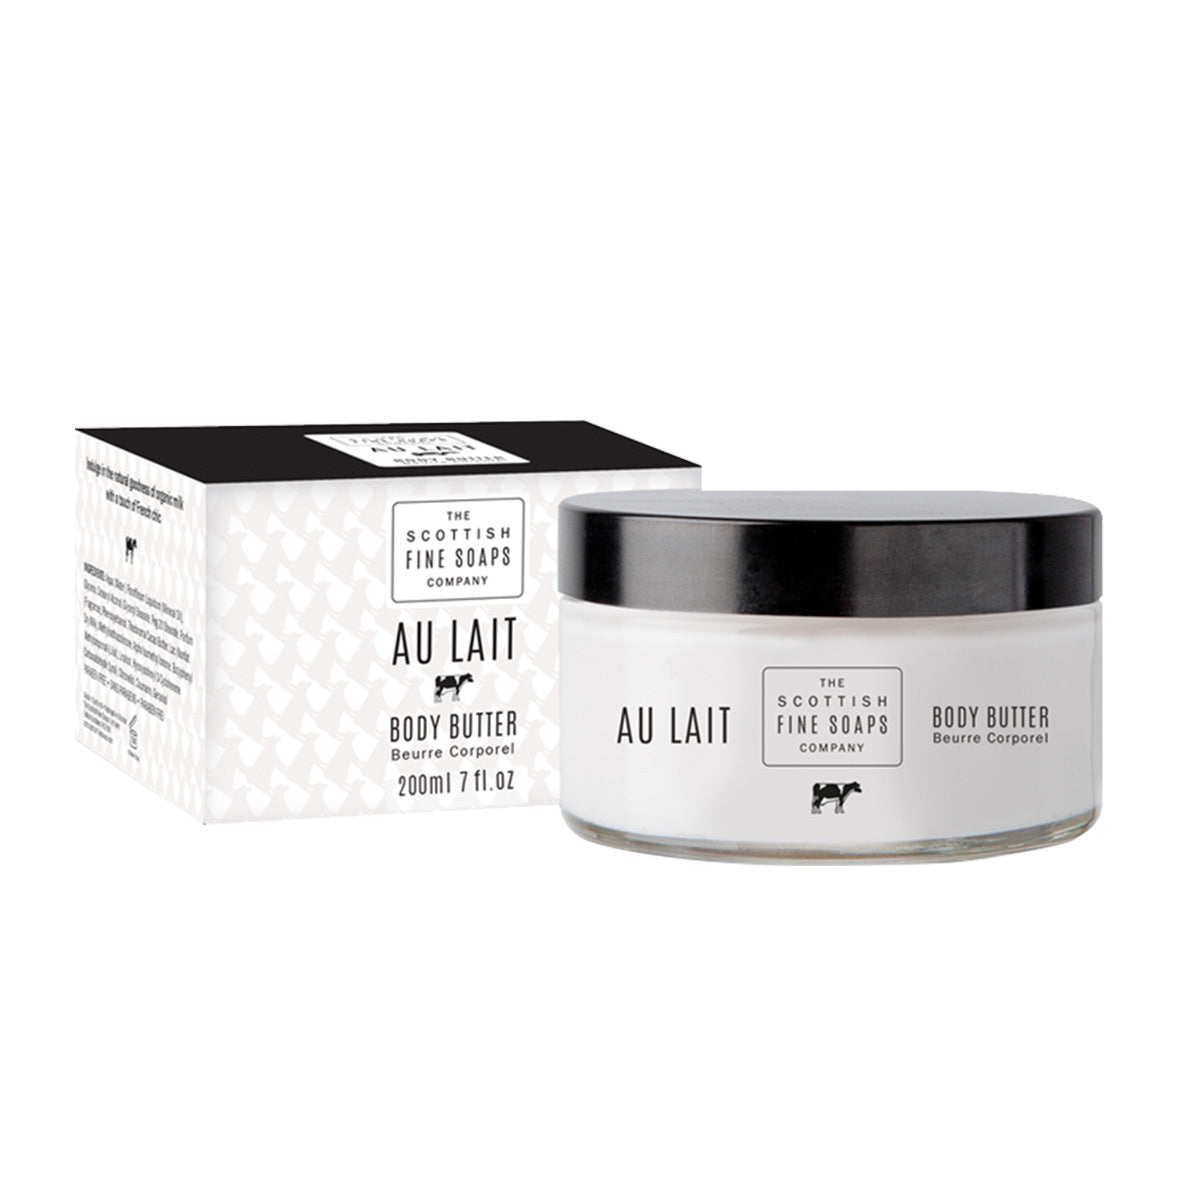 Primary image of Au Lait Body Butter